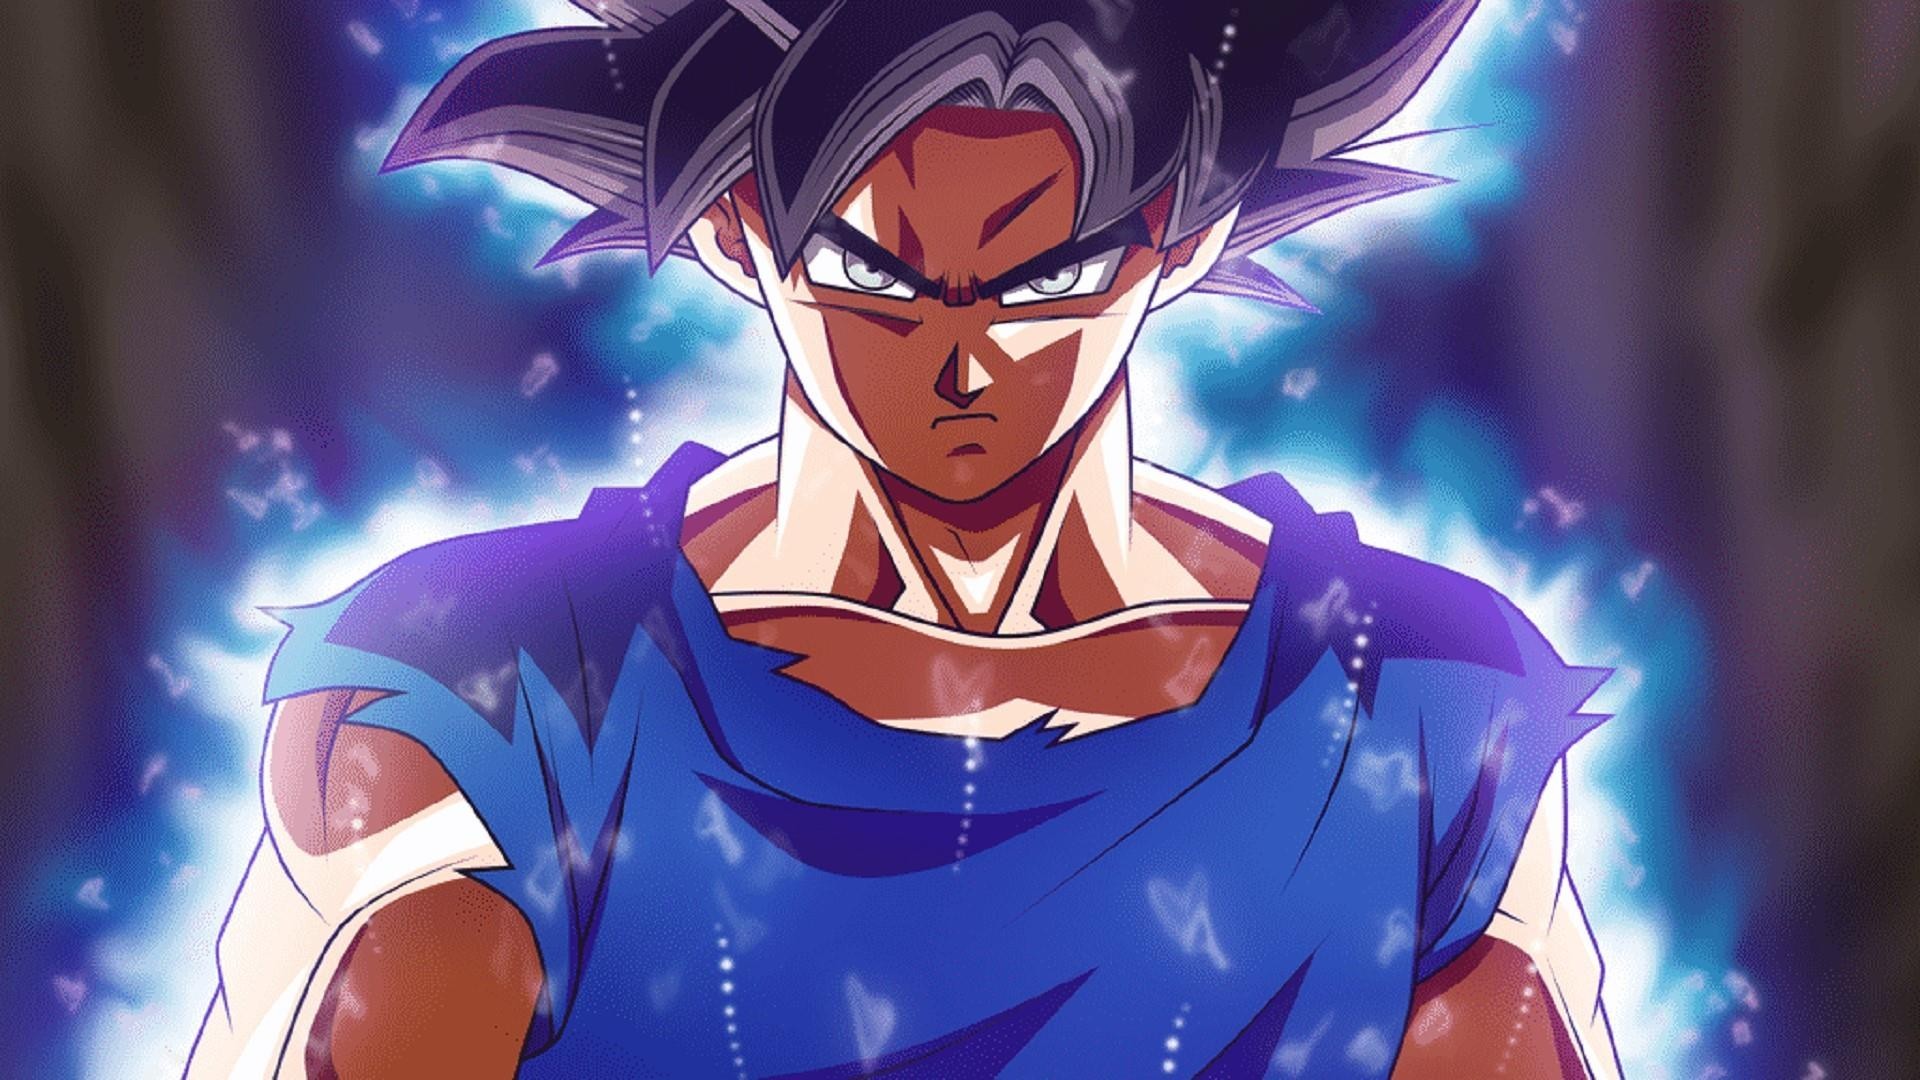 Desktop Wallpaper Goku Imagenes with resolution 1920X1080 pixel. You can use this wallpaper as background for your desktop Computer Screensavers, Android or iPhone smartphones